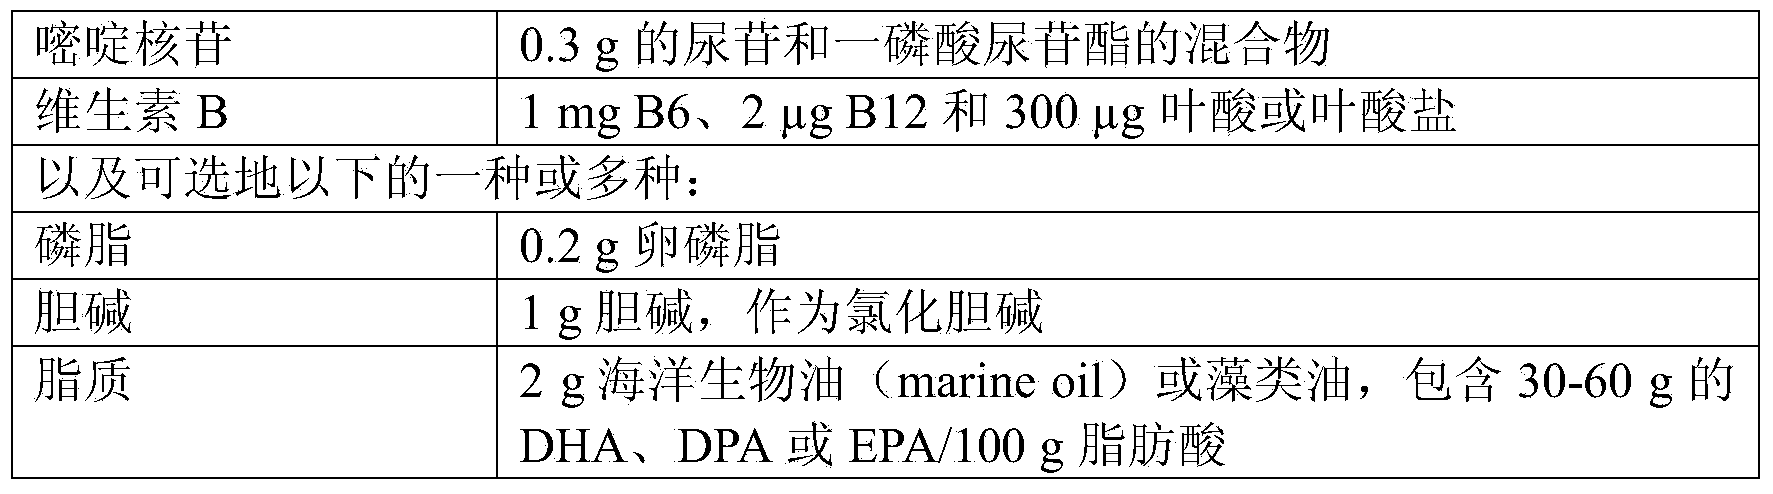 Non-medical increase or maintenance of body weight of a mammal